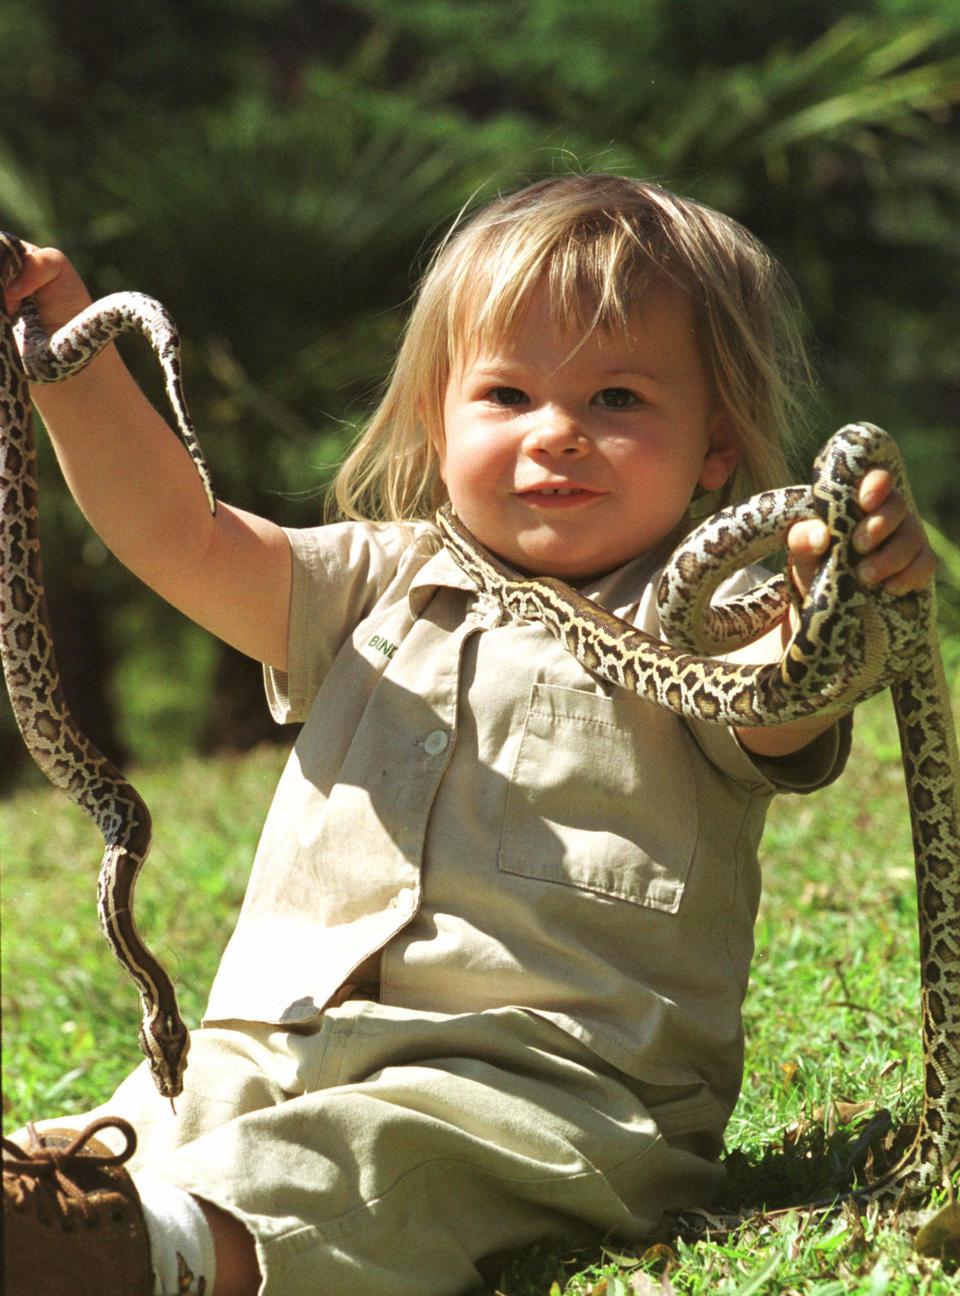 SUNSHINE COAST, AUSTRALIA - AUGUST 22: (EUROPE AND AUSTRALASIA OUT) Bindi Irwin, 2, daughter of Steve Irwin, with with Burmese Pythons. (Photo by Graeme Parkes/Newspix/Getty Images)